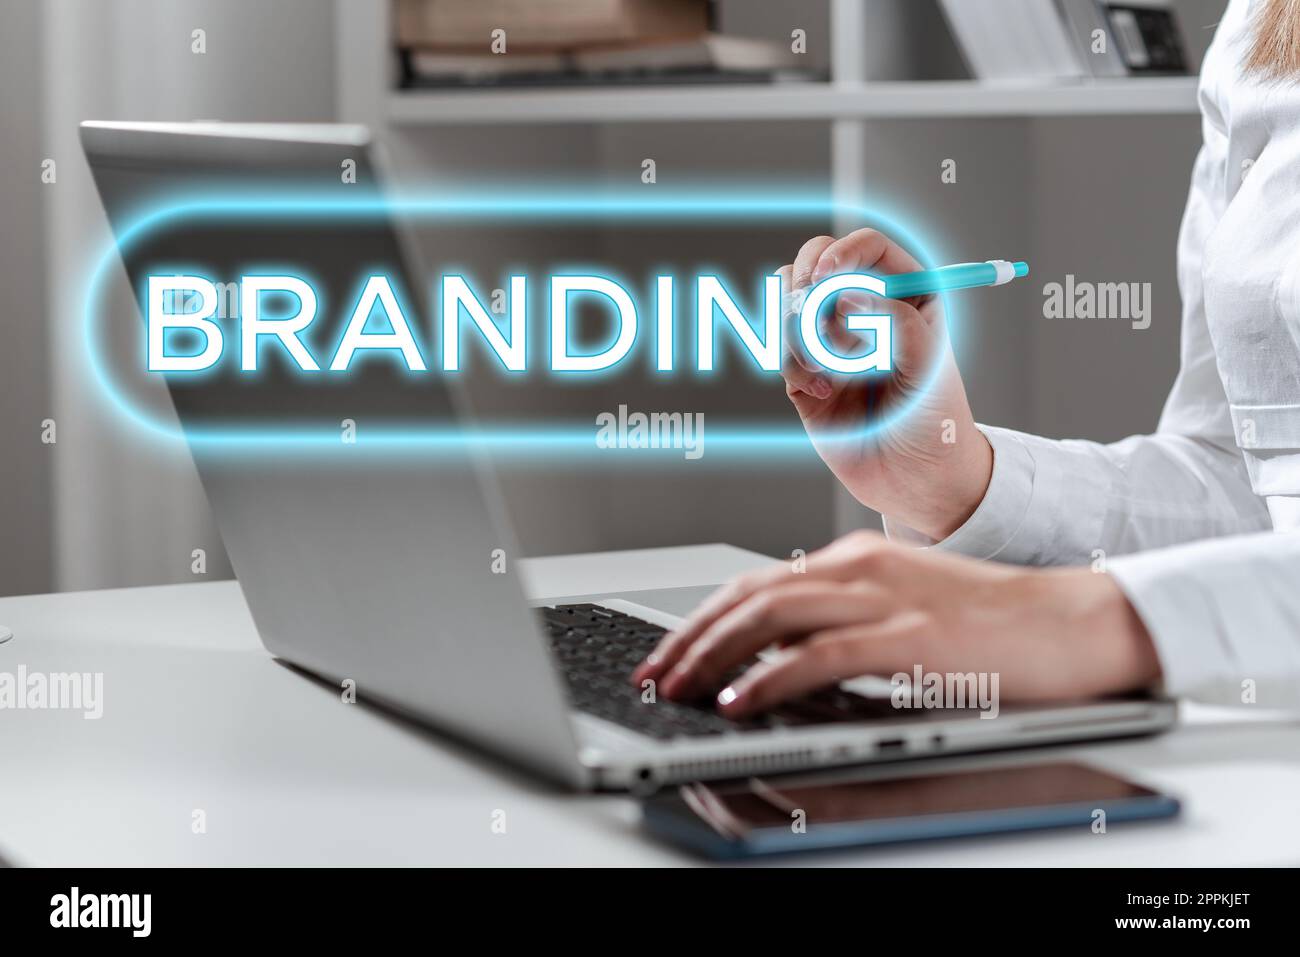 Sign displaying Branding. Business concept promotion of product by means of advertising and distinctive design Stock Photo